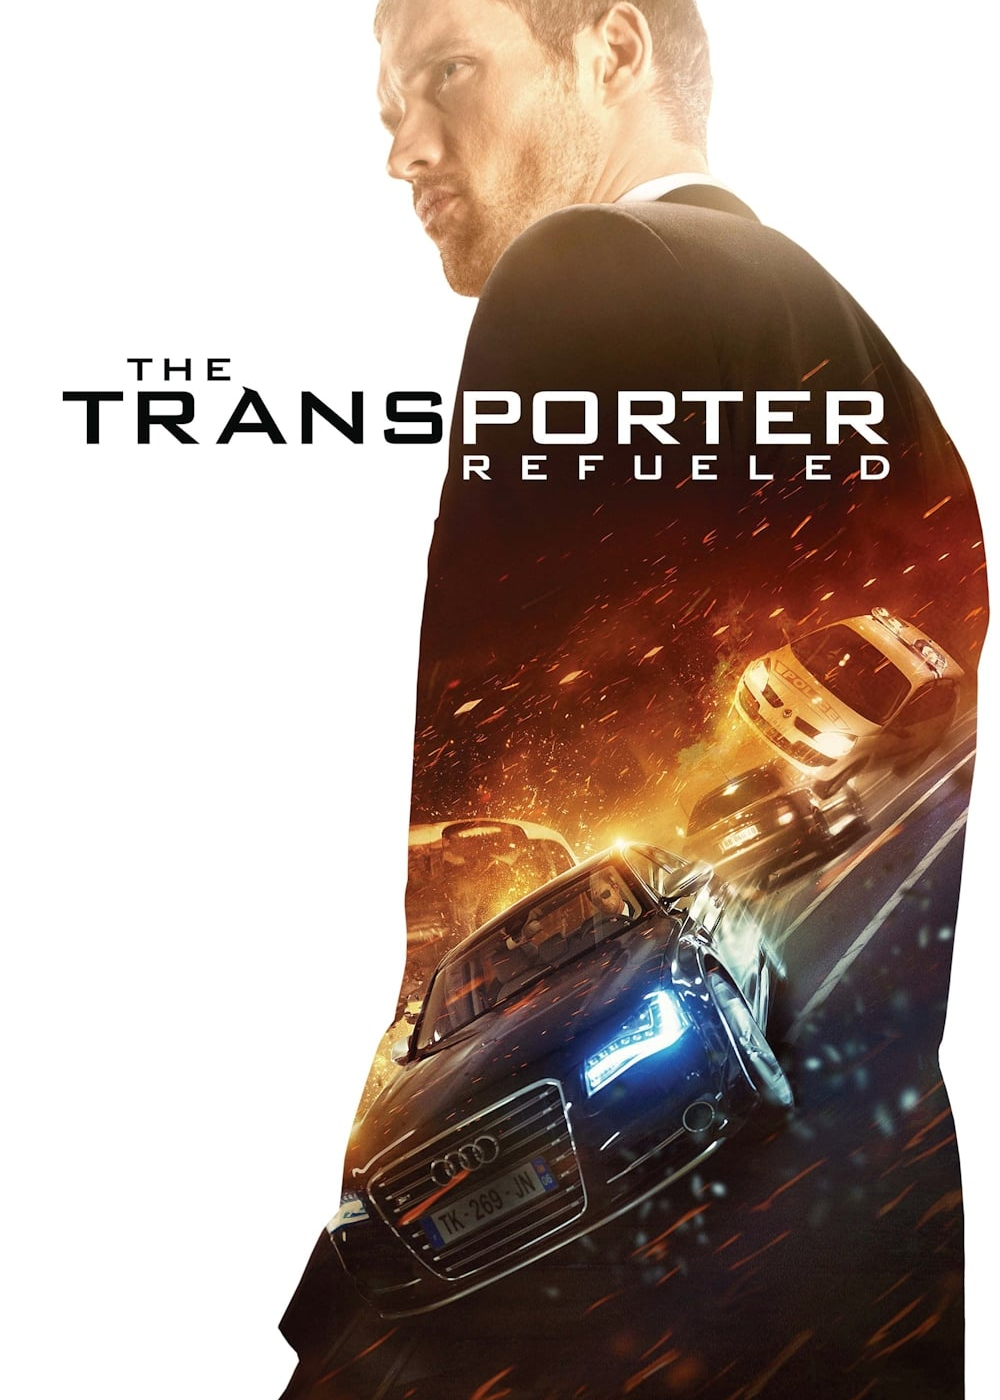 Poster Phim The Transporter Refueled (The Transporter Refueled)